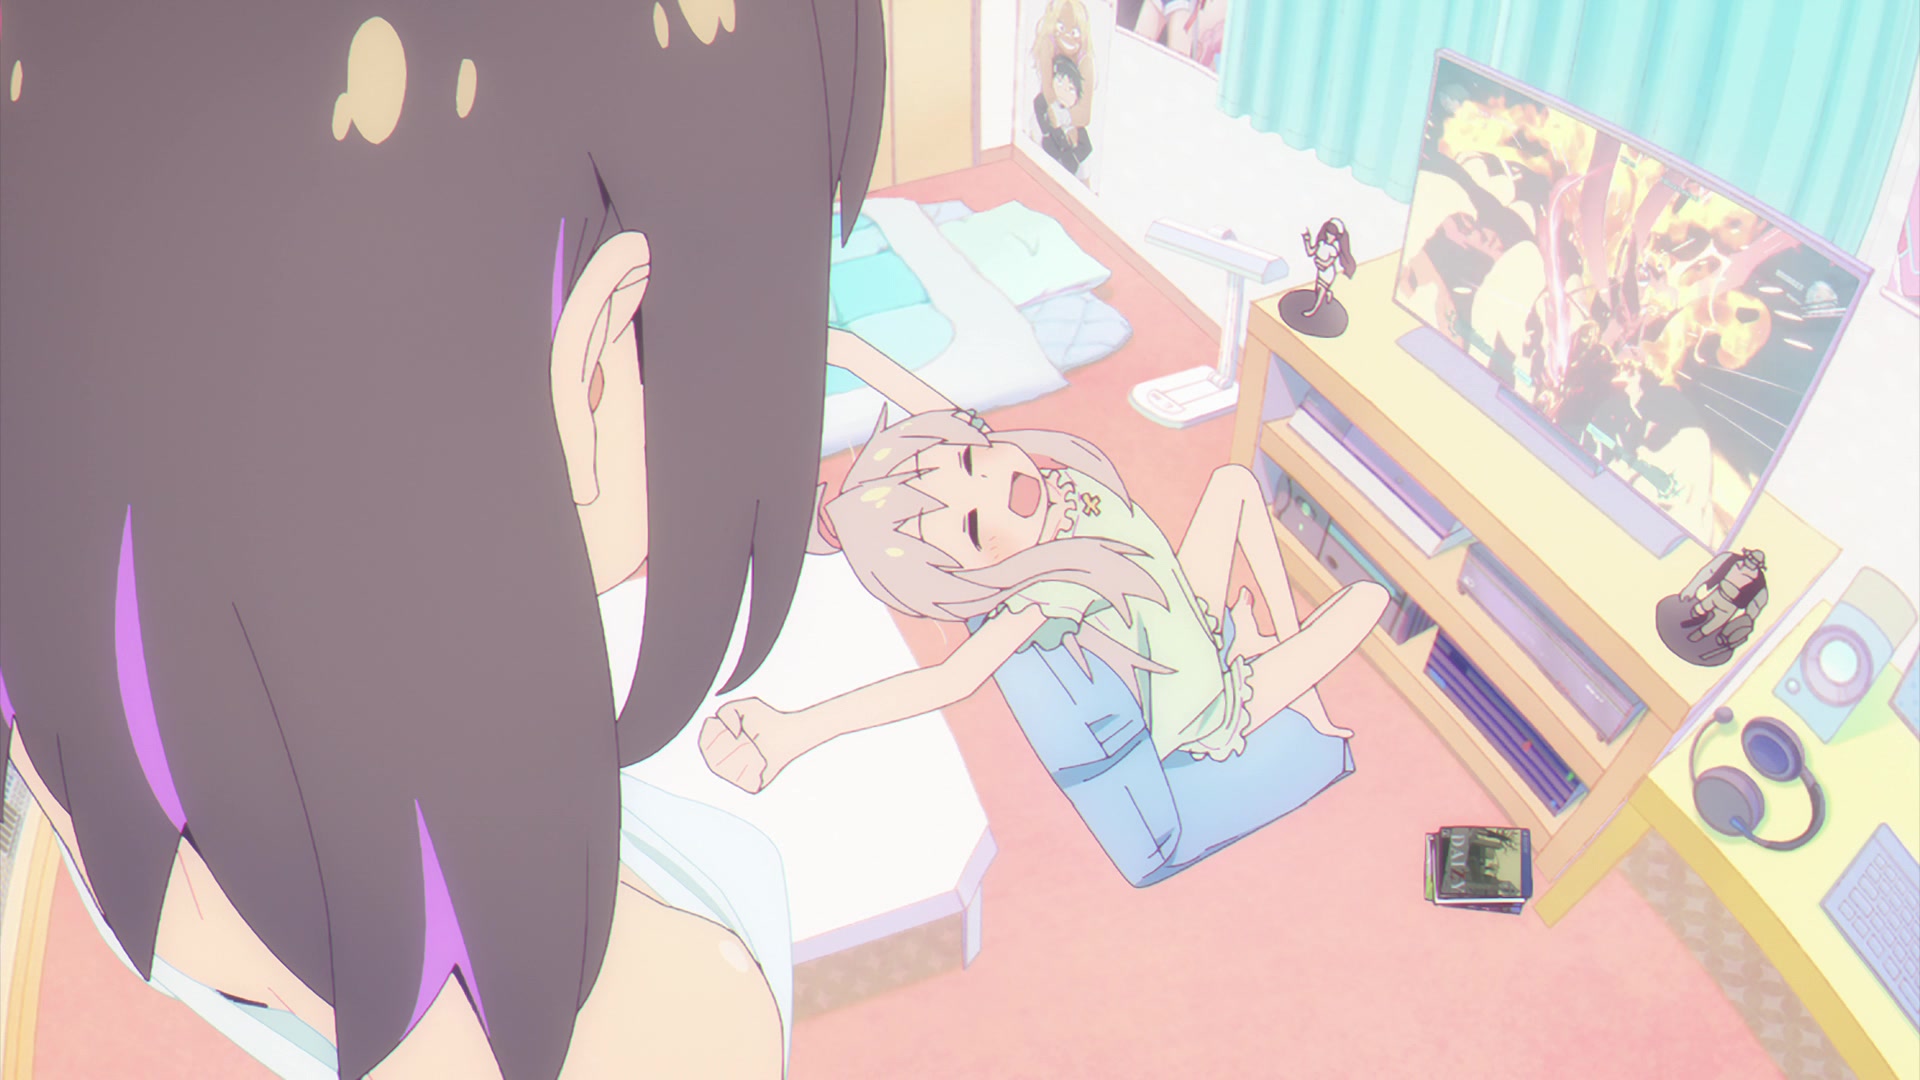 Mahiro takes a quick break from flexing his skills in ONIMAI: I'm Now Your Sister Episode 2 "Mahiro's Time of the Month" (2023), Studio Bind via Crunchyroll